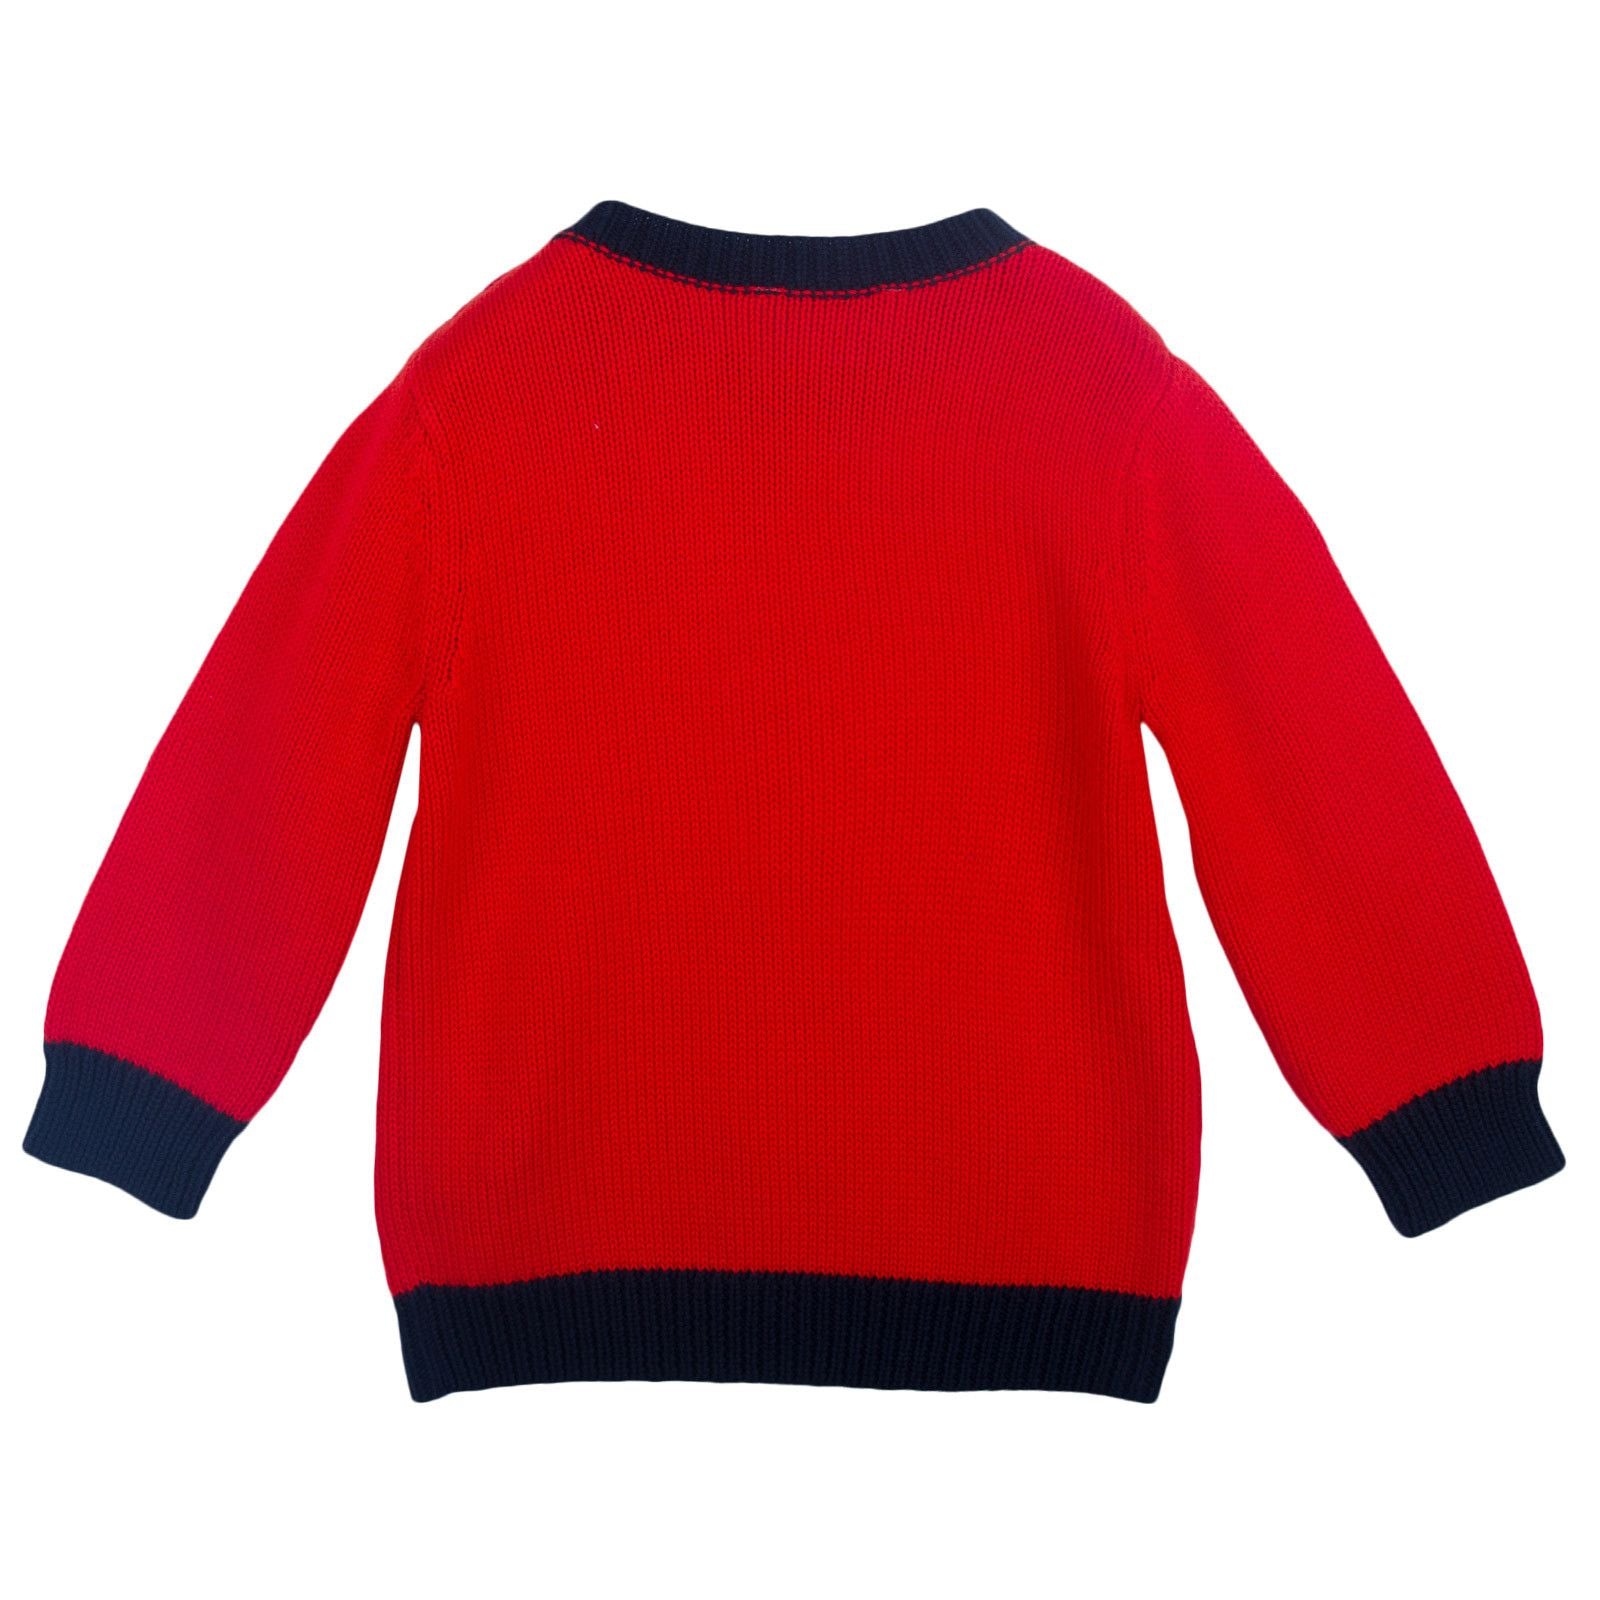 Boys Red 'Mr Marc' Spaceman Knitted Sweater - CÉMAROSE | Children's Fashion Store - 2